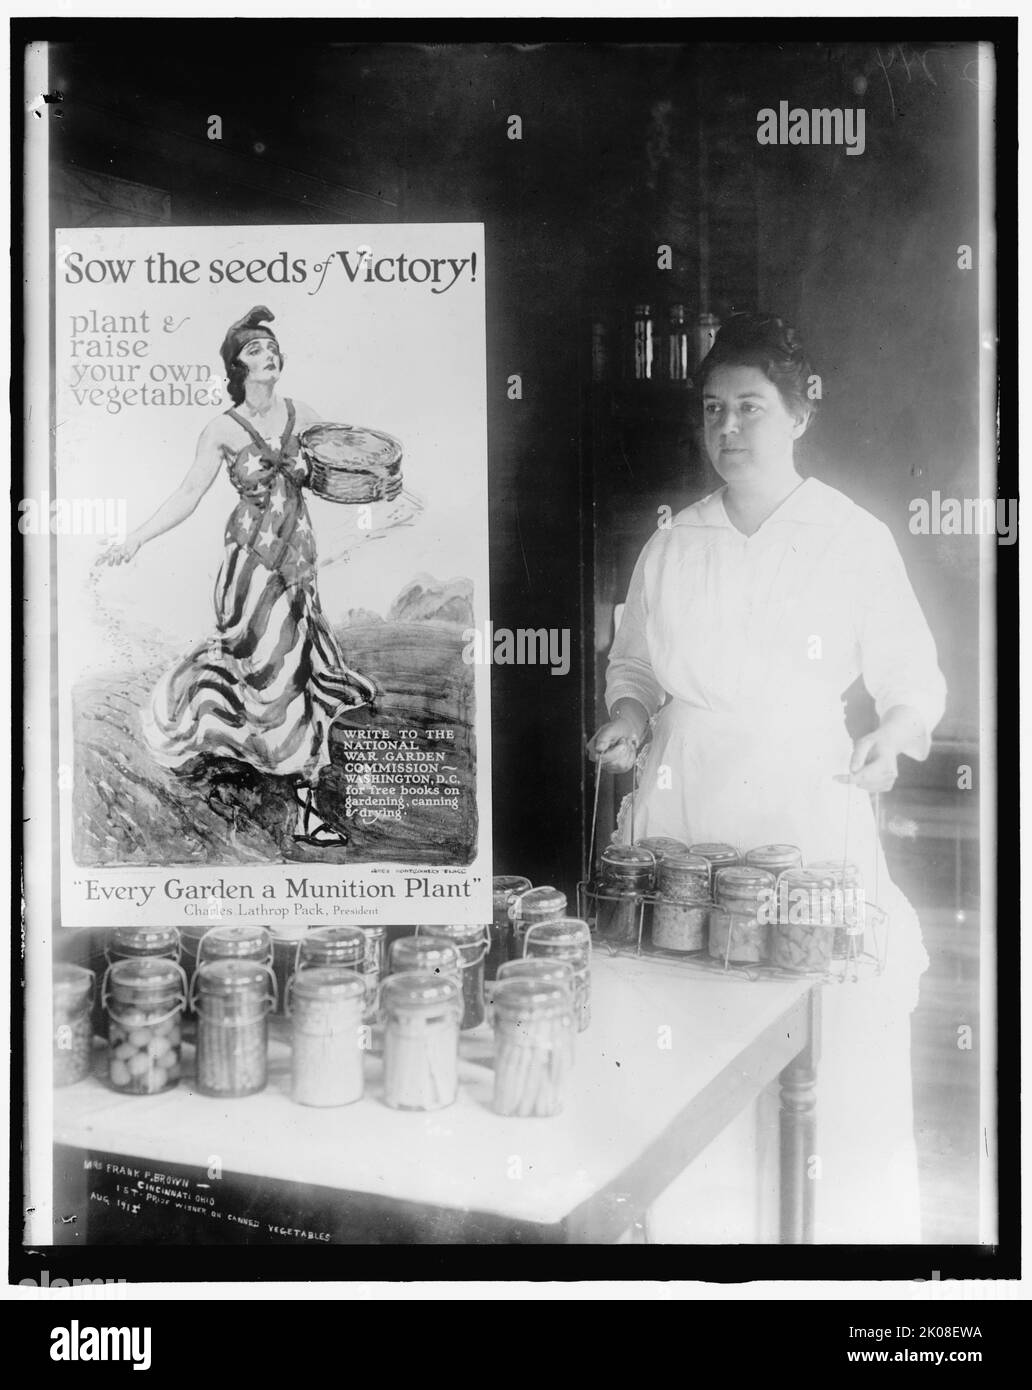 Mrs. Frank P. Brown, Cincinnati, Ohio. 1st prize winner of canned vegetables, Aug. 191[?]. First World War: woman with preseved food, and poster with personification of the USA, encouraging people to grown their own vegetables: 'Sow the seeds of Victory! plant and raise your own vegetables; write to the National War Garden Commission, Washington, D.C. for free books on gardening, canning and drying. Every Garden a Munition Plant - Charles Lathrop Pack, President'. Stock Photo